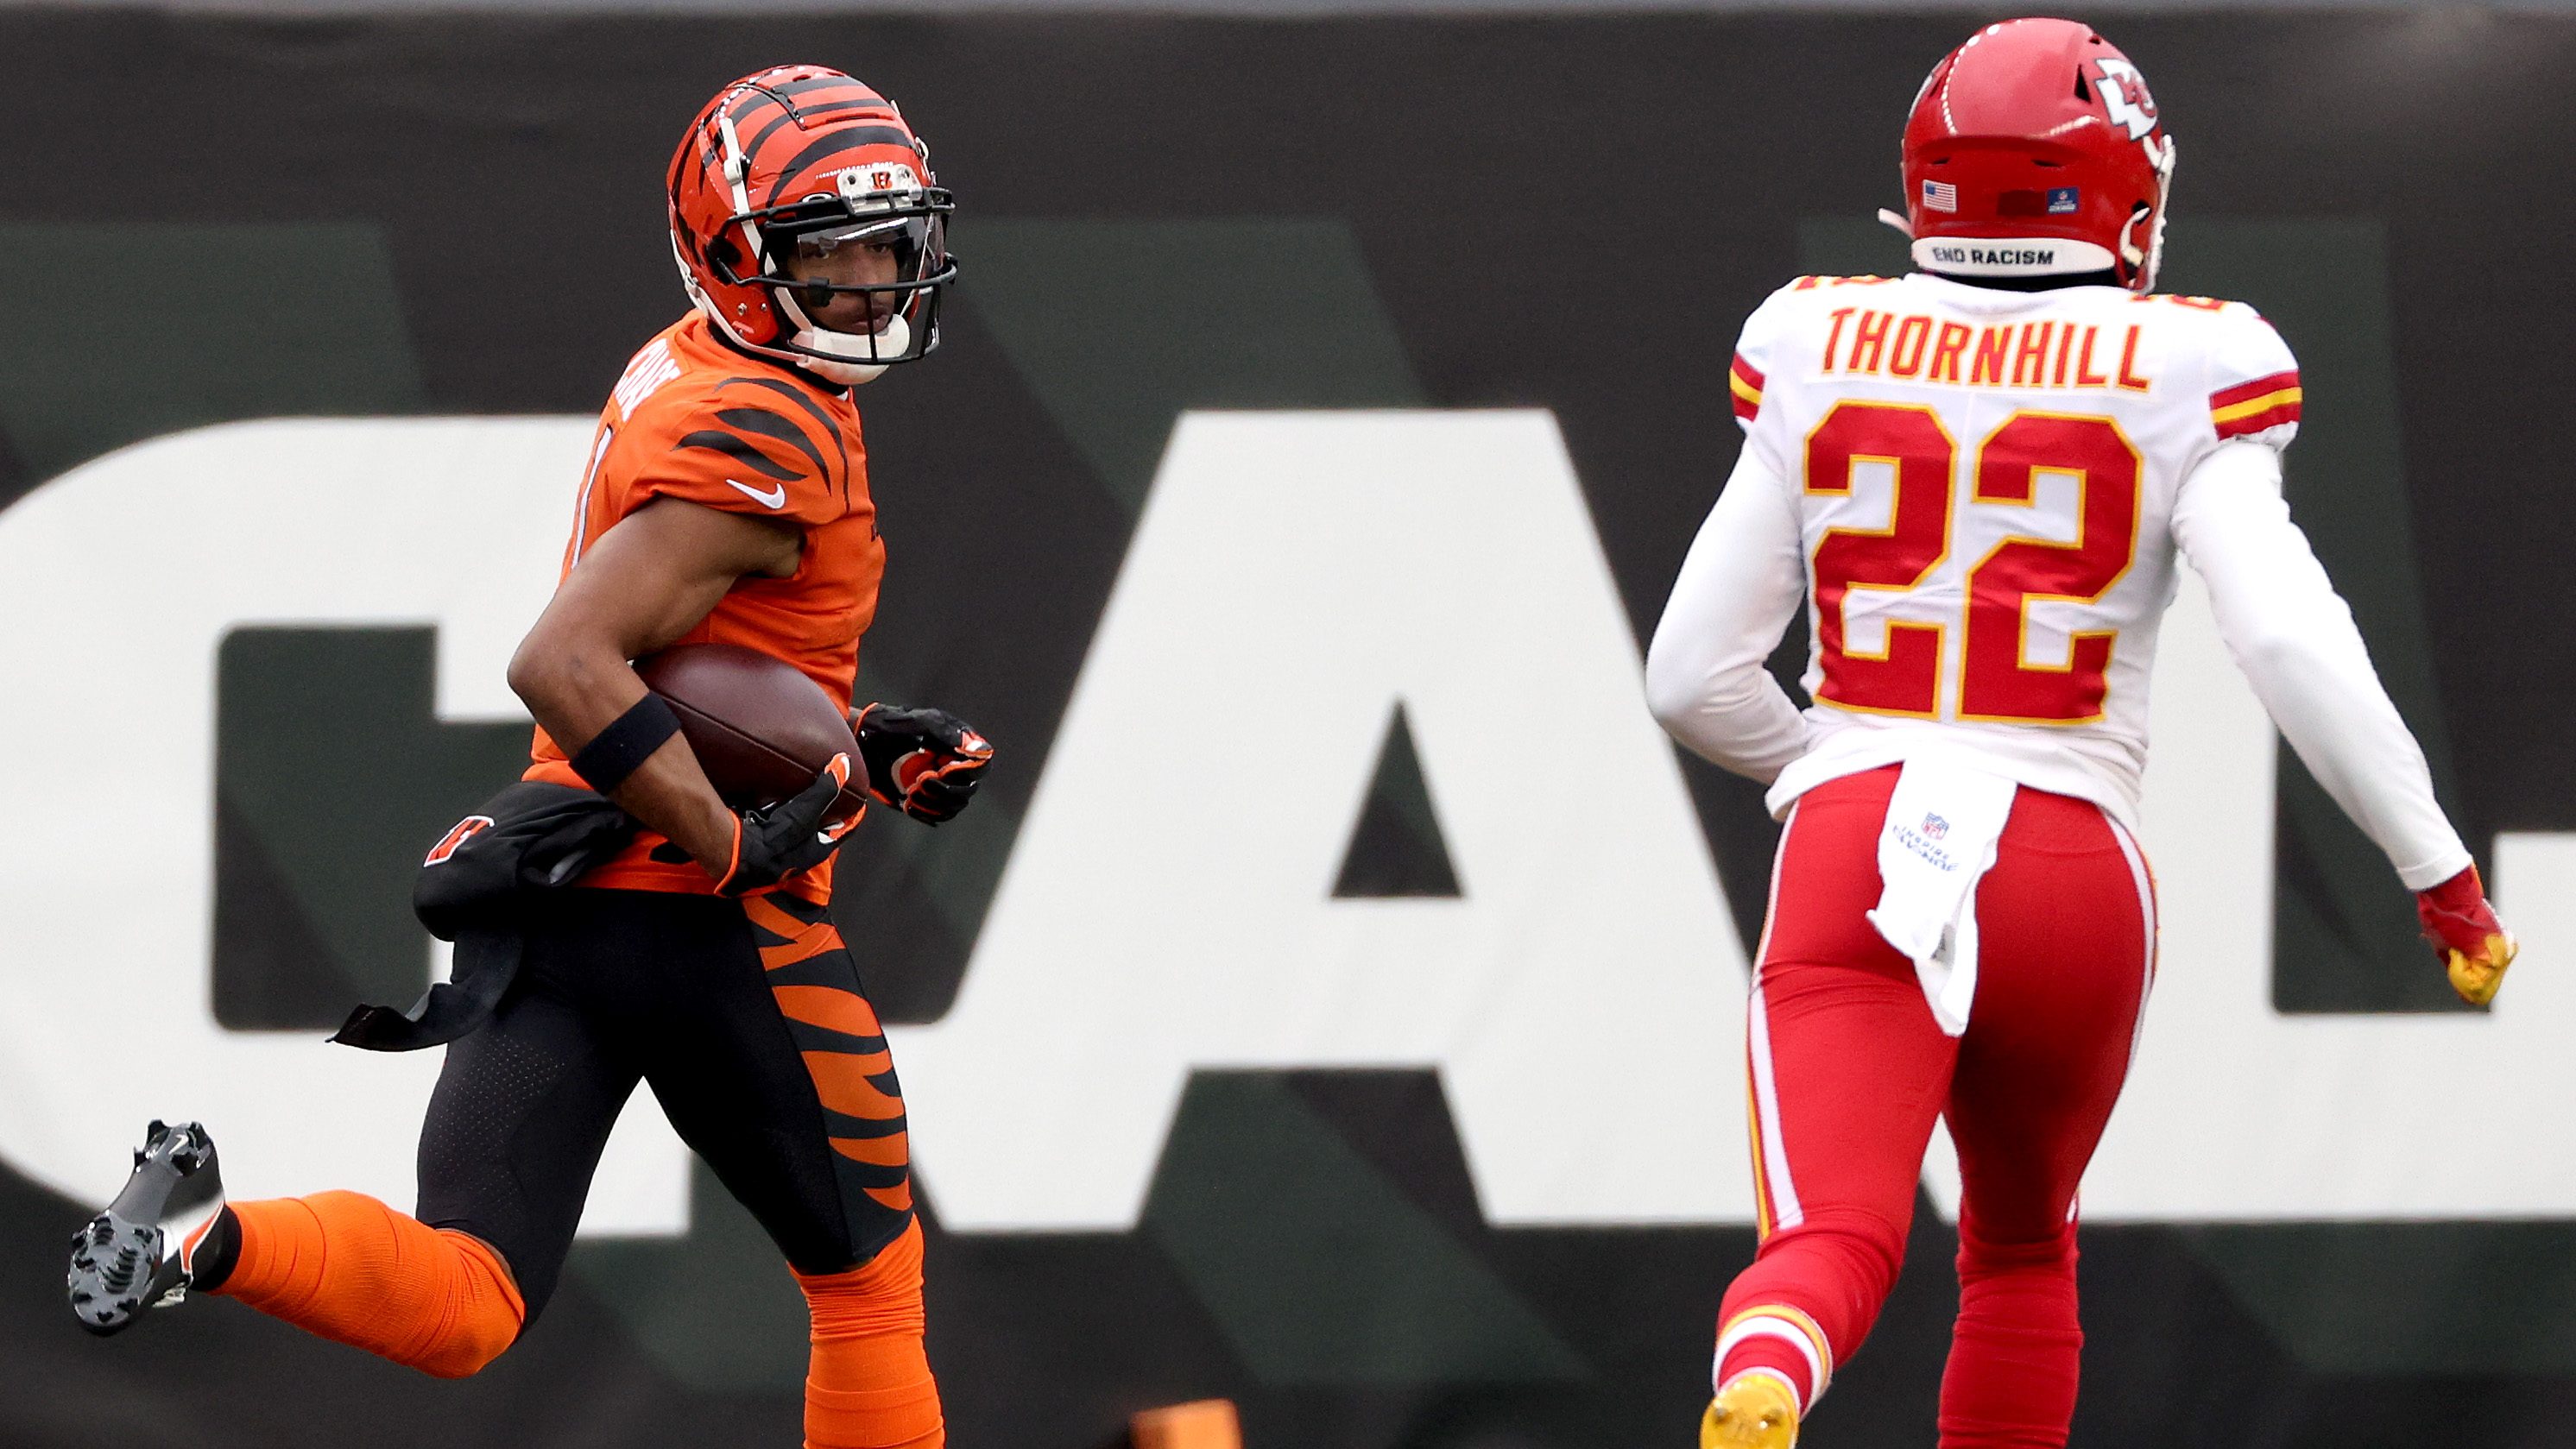 Chiefs’ Justin Reid Sparks ‘Twitter Beef’ With Bengals’
Ja’Marr Chase